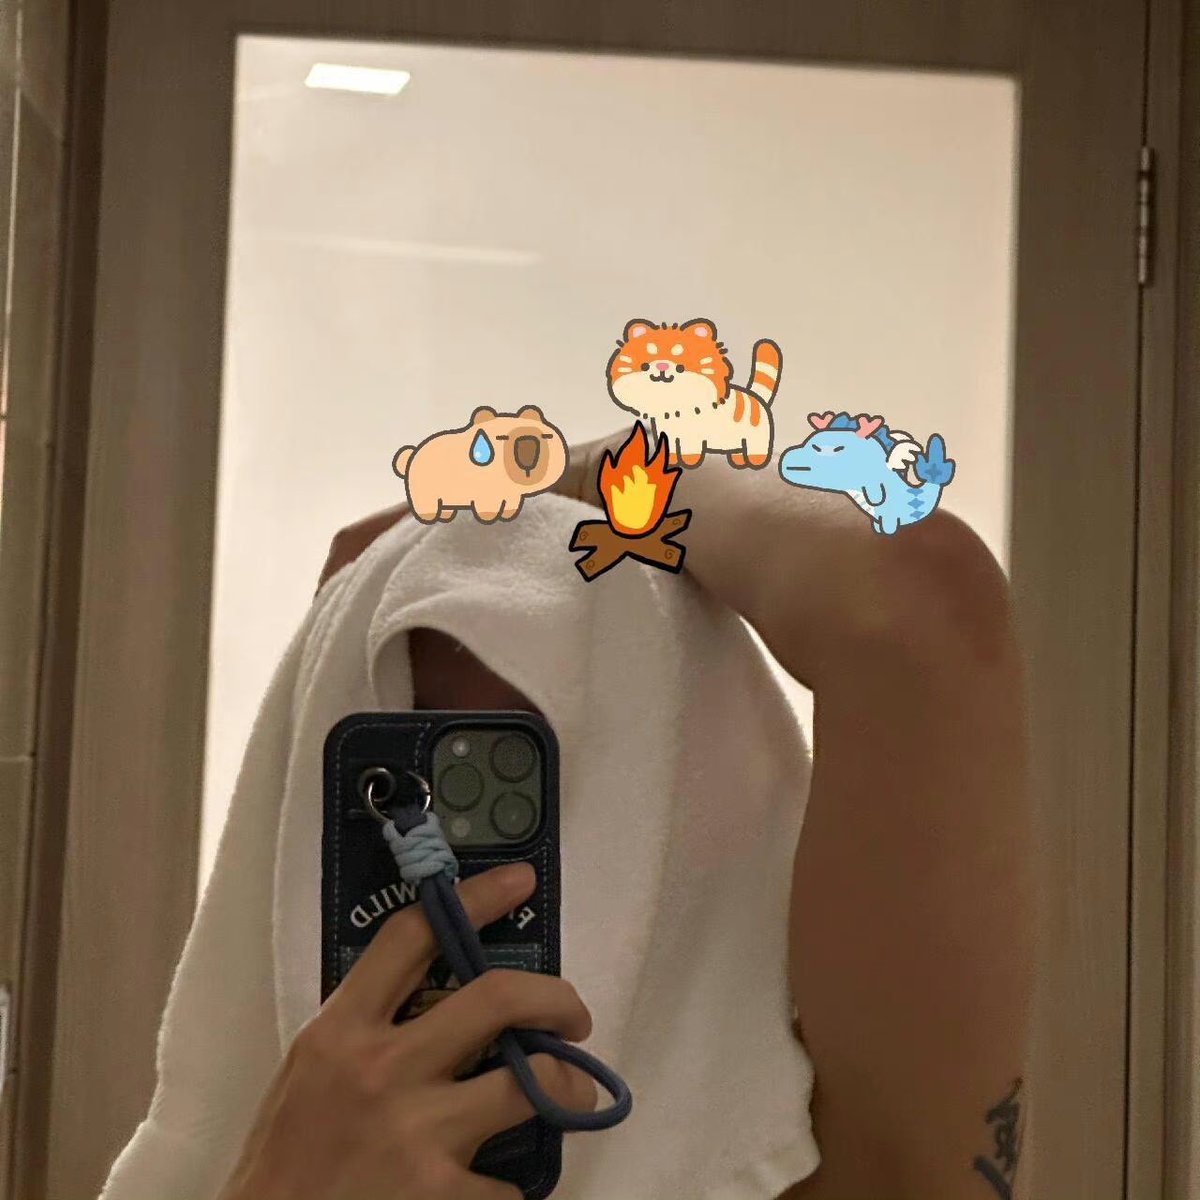 HELLO---- WHAT THE!

THE TATTOO WITH THE STICKERS OF CUTE KITTENS? 😭😭😭😭😭 Someone call the police, it's a crime to be this HOT! 

#BuildJakapan #Beyourluve